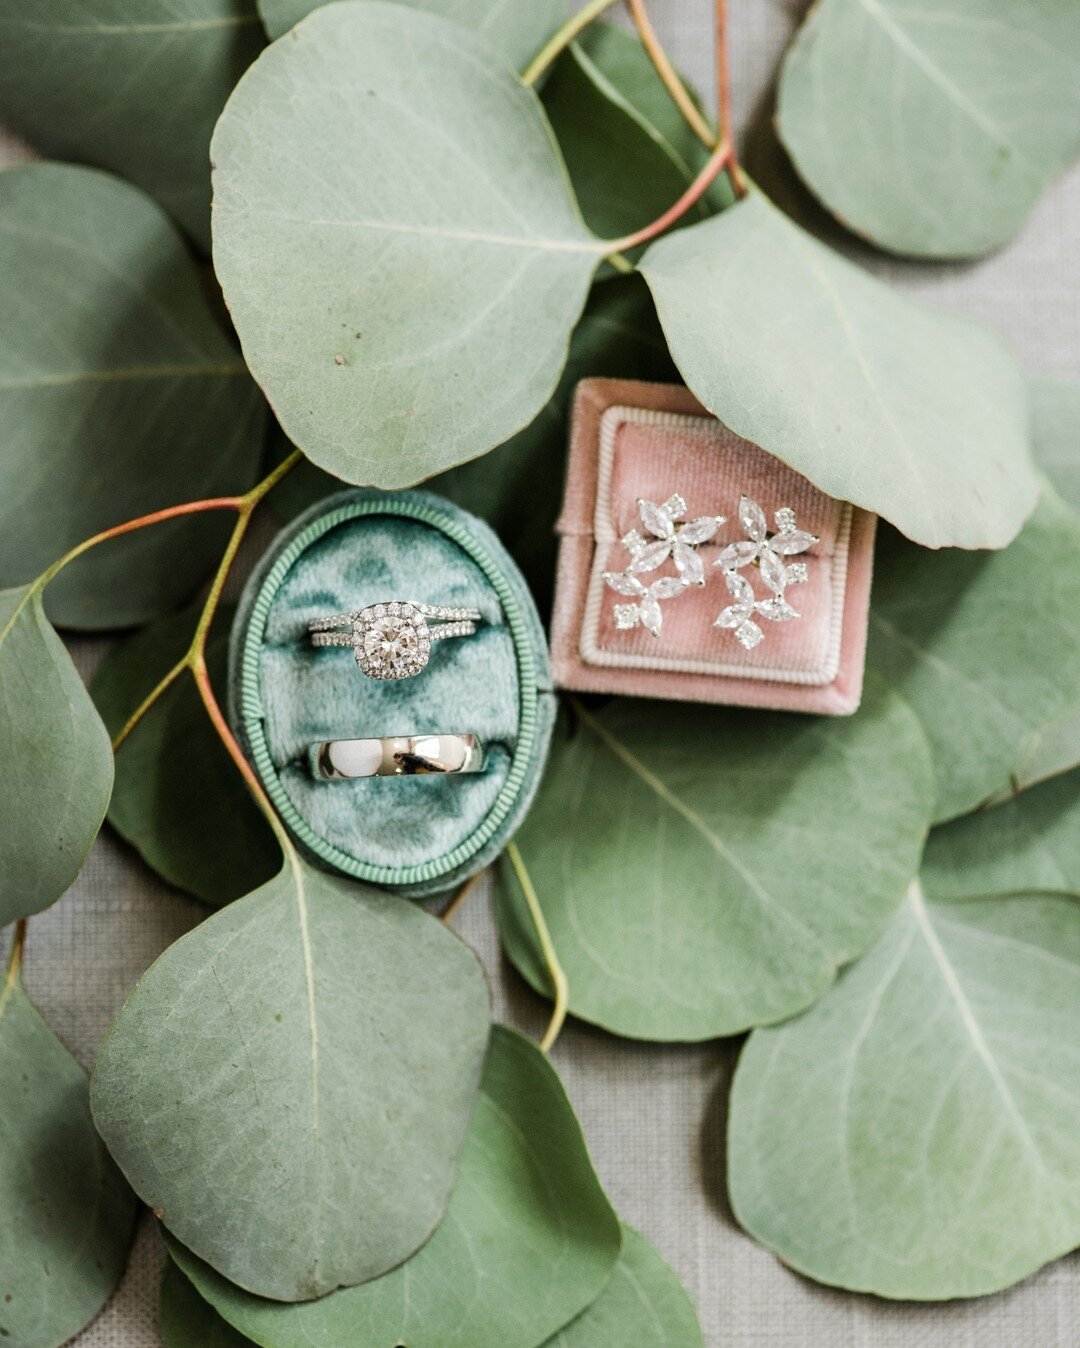 Have we mentioned... we love the details!?? 😍😍😍⠀⠀⠀⠀⠀⠀⠀⠀⠀
📸: @alyonaphotography⠀⠀⠀⠀⠀⠀⠀⠀⠀
.⠀⠀⠀⠀⠀⠀⠀⠀⠀
.⠀⠀⠀⠀⠀⠀⠀⠀⠀
.⠀⠀⠀⠀⠀⠀⠀⠀⠀
#pinelandplace #wedding #charlestonwedding #weddinginspo #weddingvenue #weddingday #charlestonweddingvenues #charlestonevents